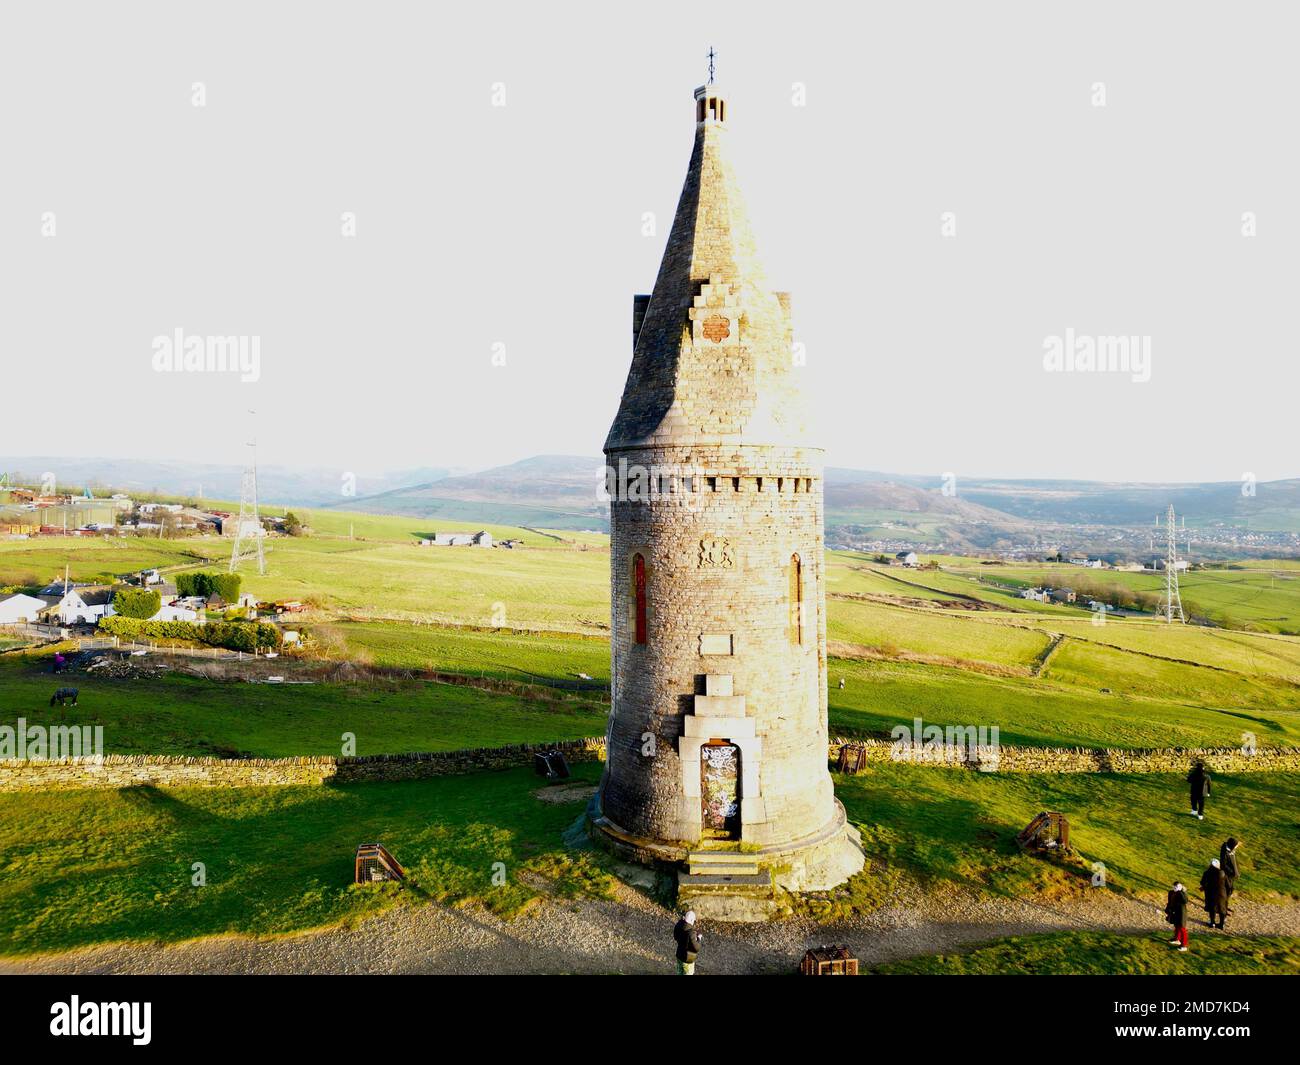 A beautiful view of the tower at the top of the Hartshead Pike hill in Ashton-under-Lyne, England Stock Photo